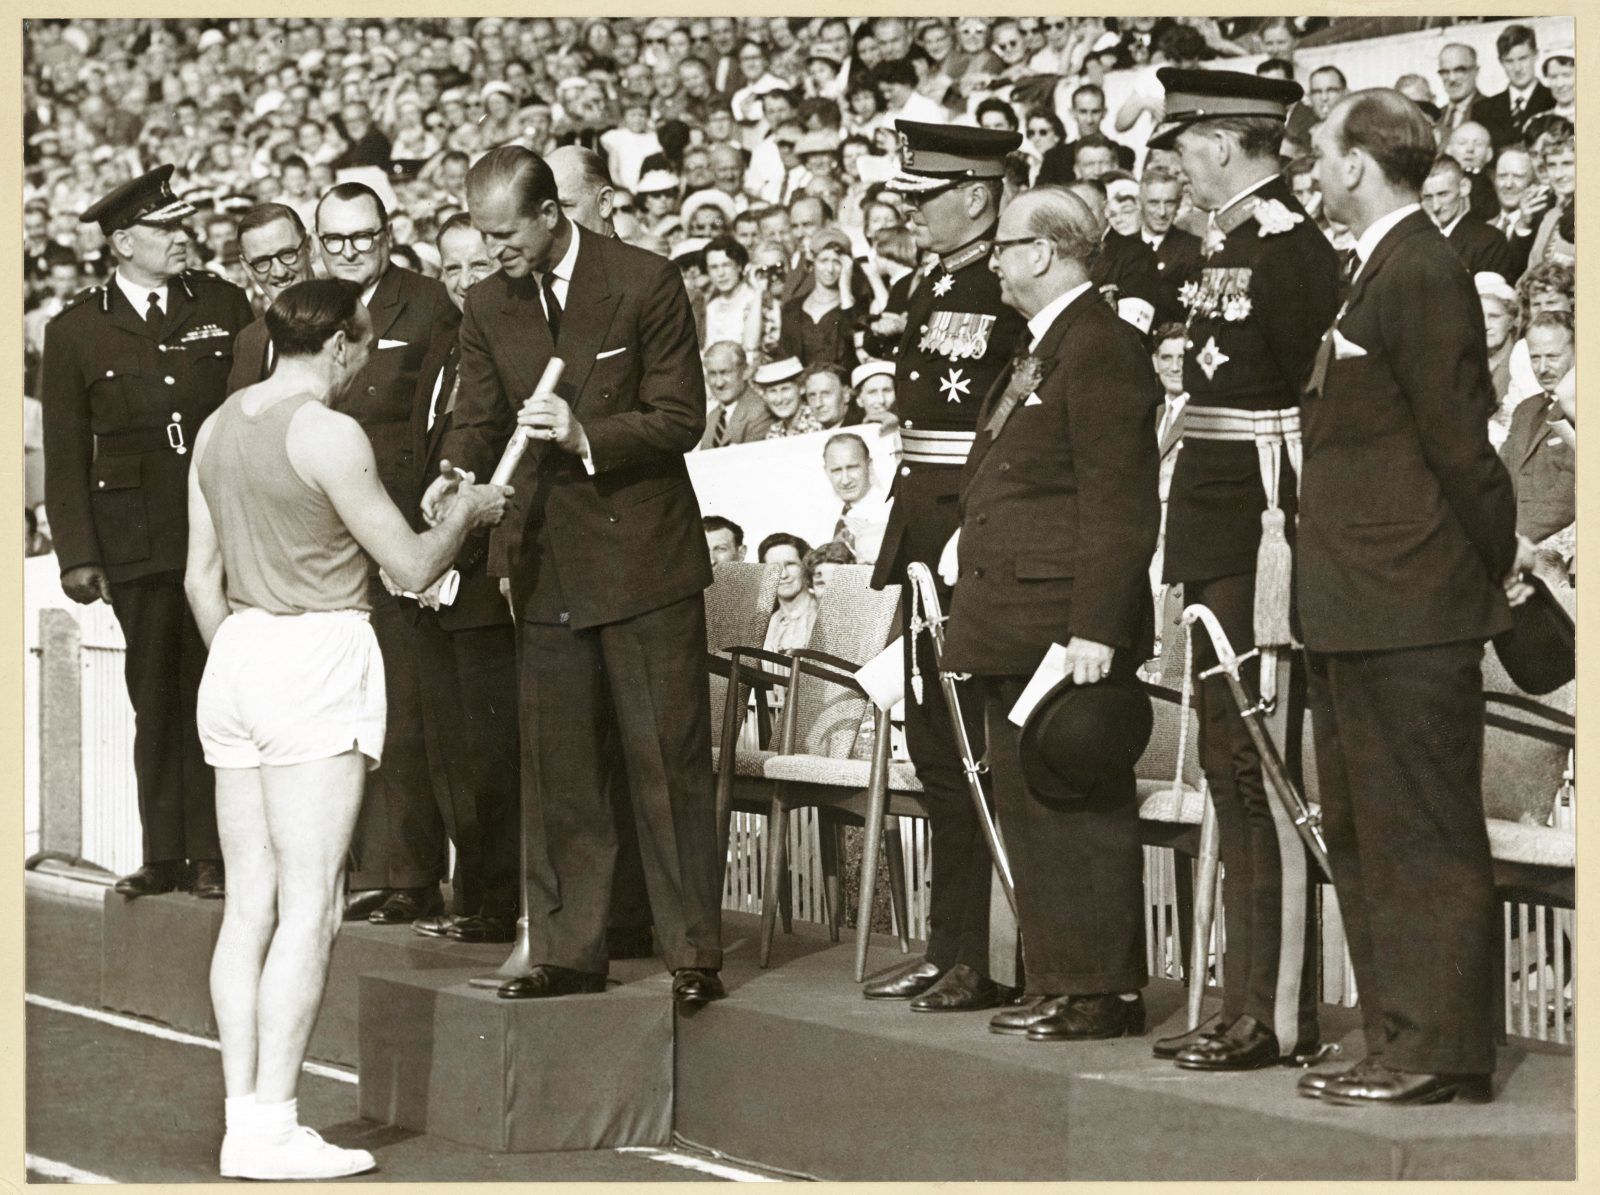 Ken Jones, former Wales rugby player and Olympic athlete, presenting the baton to the Duke of Edinburgh at the opening ceremony at Cardiff Arms Park. (© Commonwealth Games Federation)